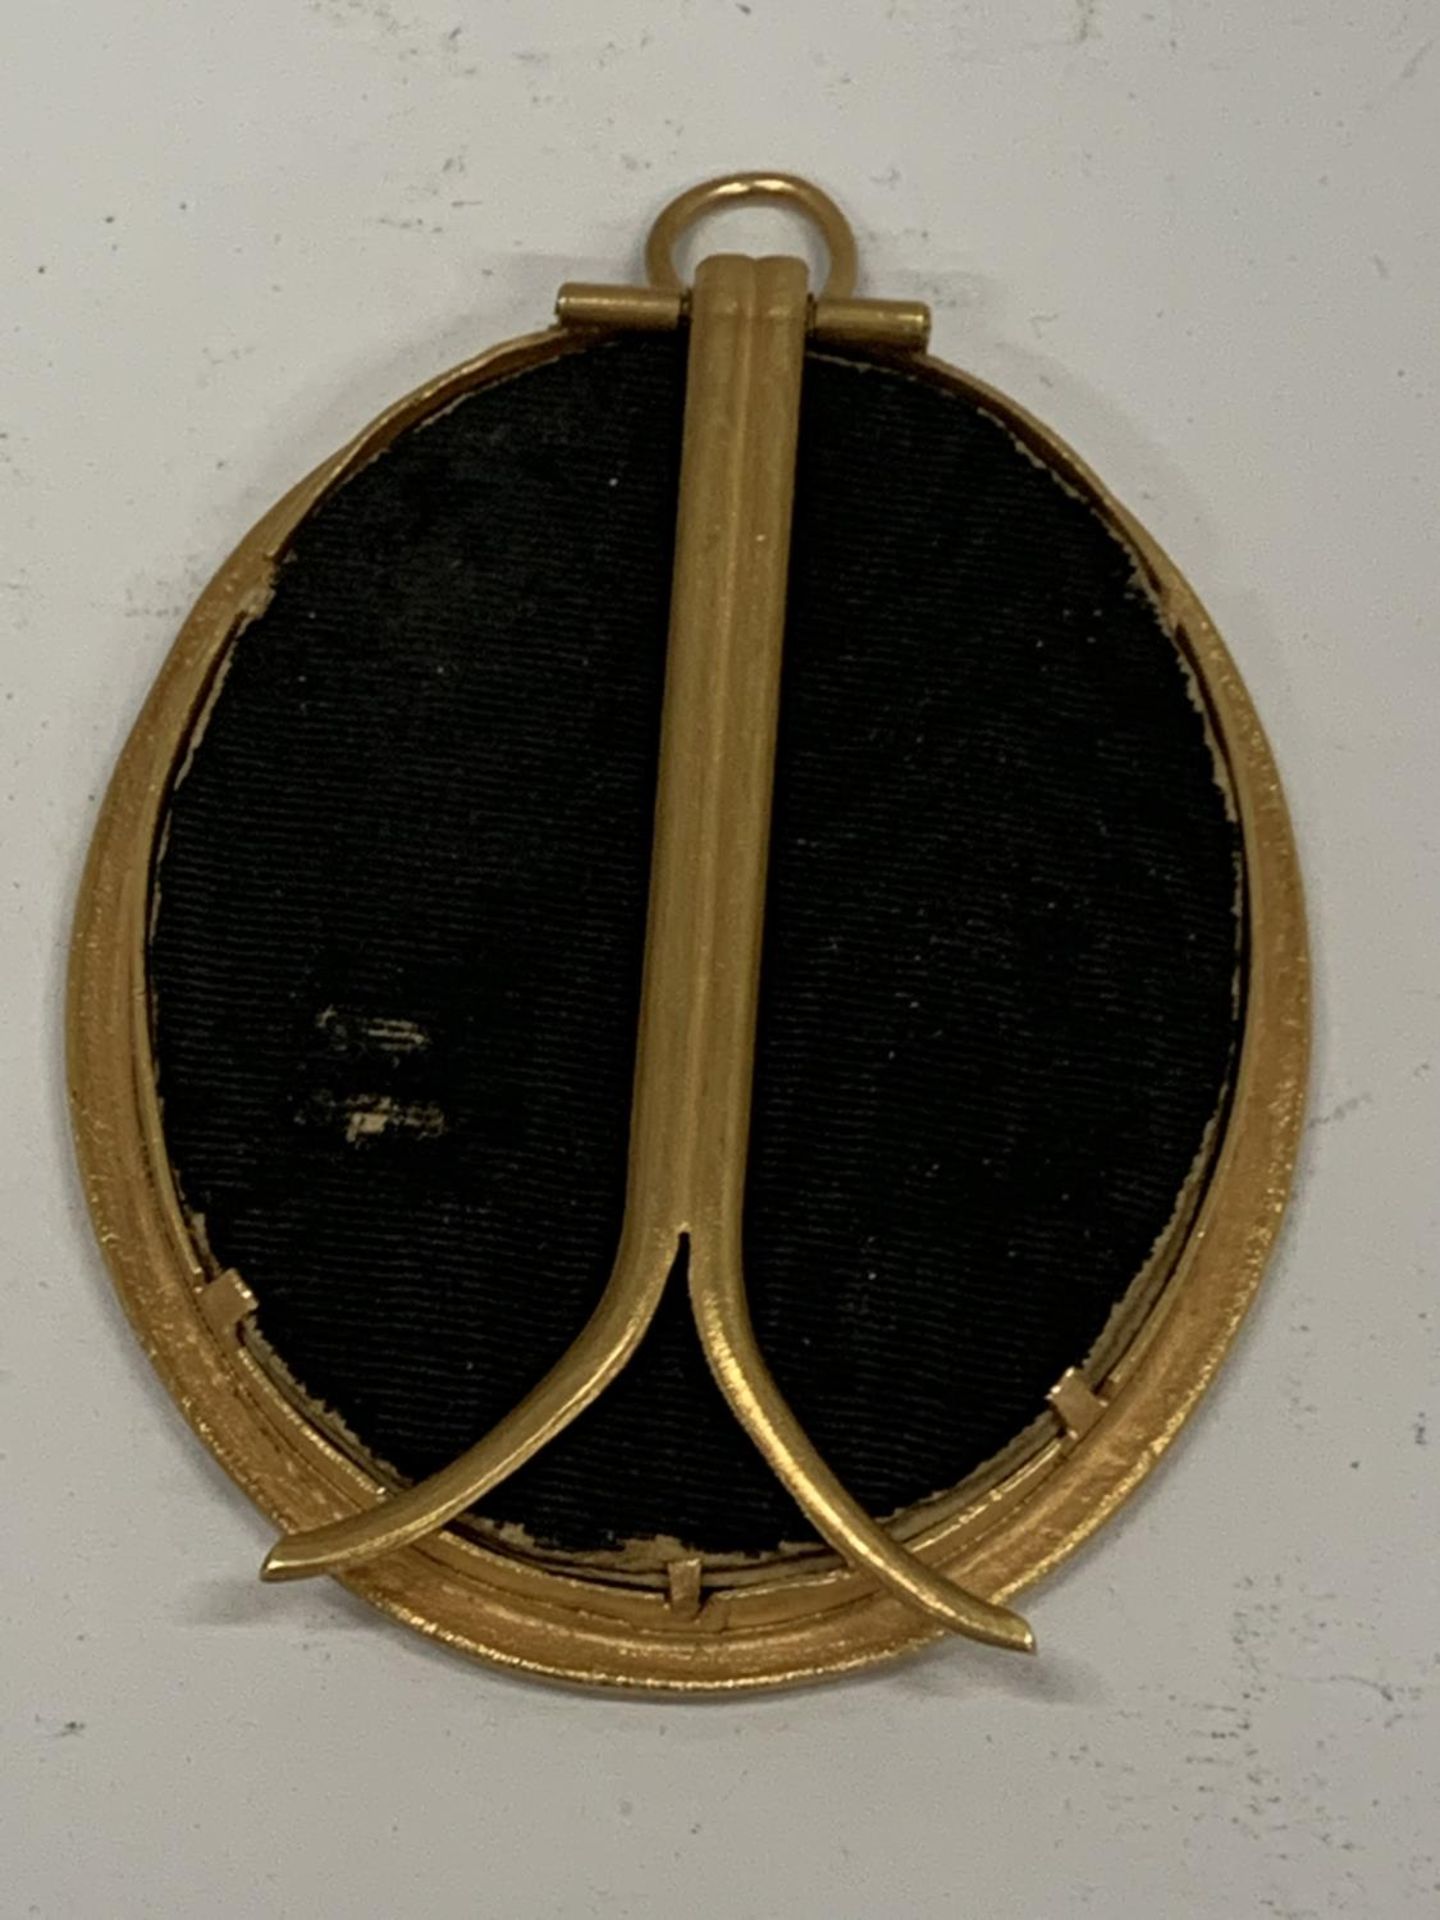 AN 18TH/19TH CENTURY PORTRAIT MINIATURE IN GILT EASEL FRAME, LENGTH 7CM - Image 4 of 4